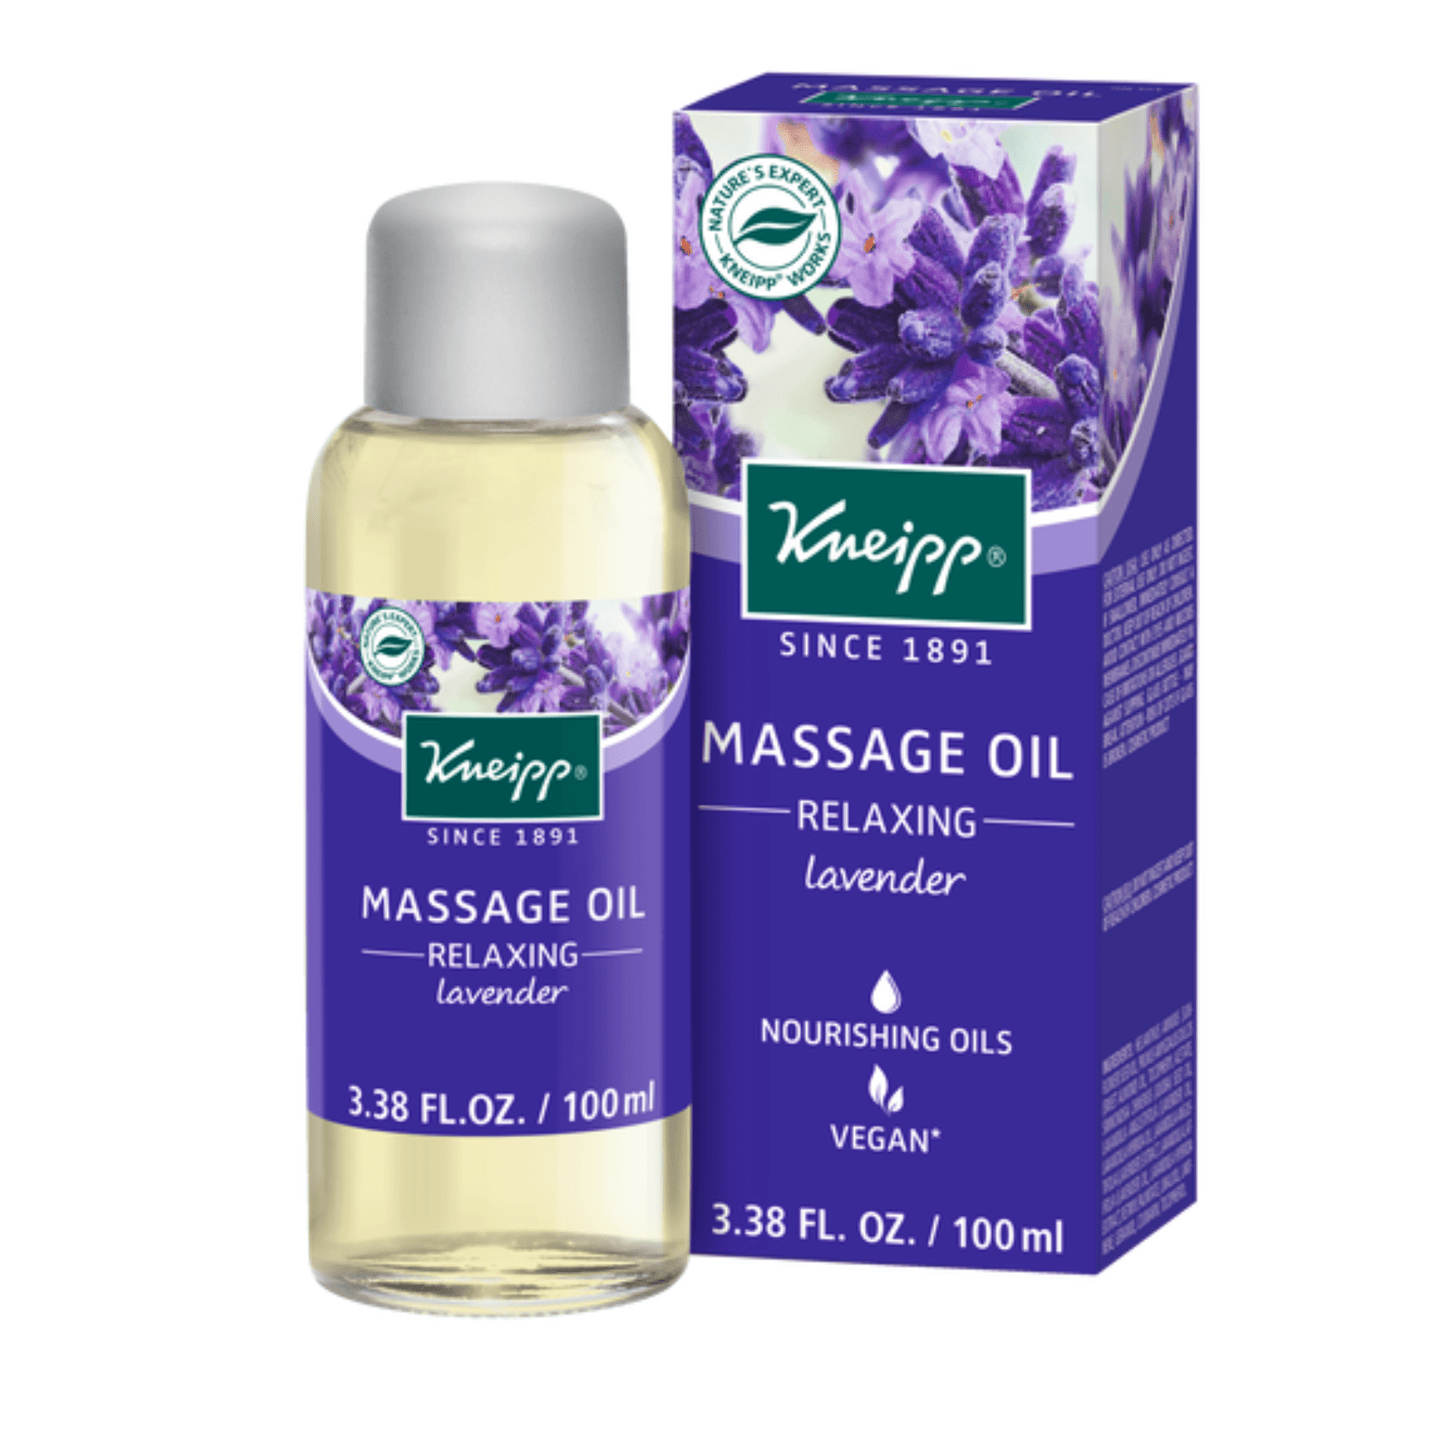 Primary Image of Lavender Relaxing Massage Oil